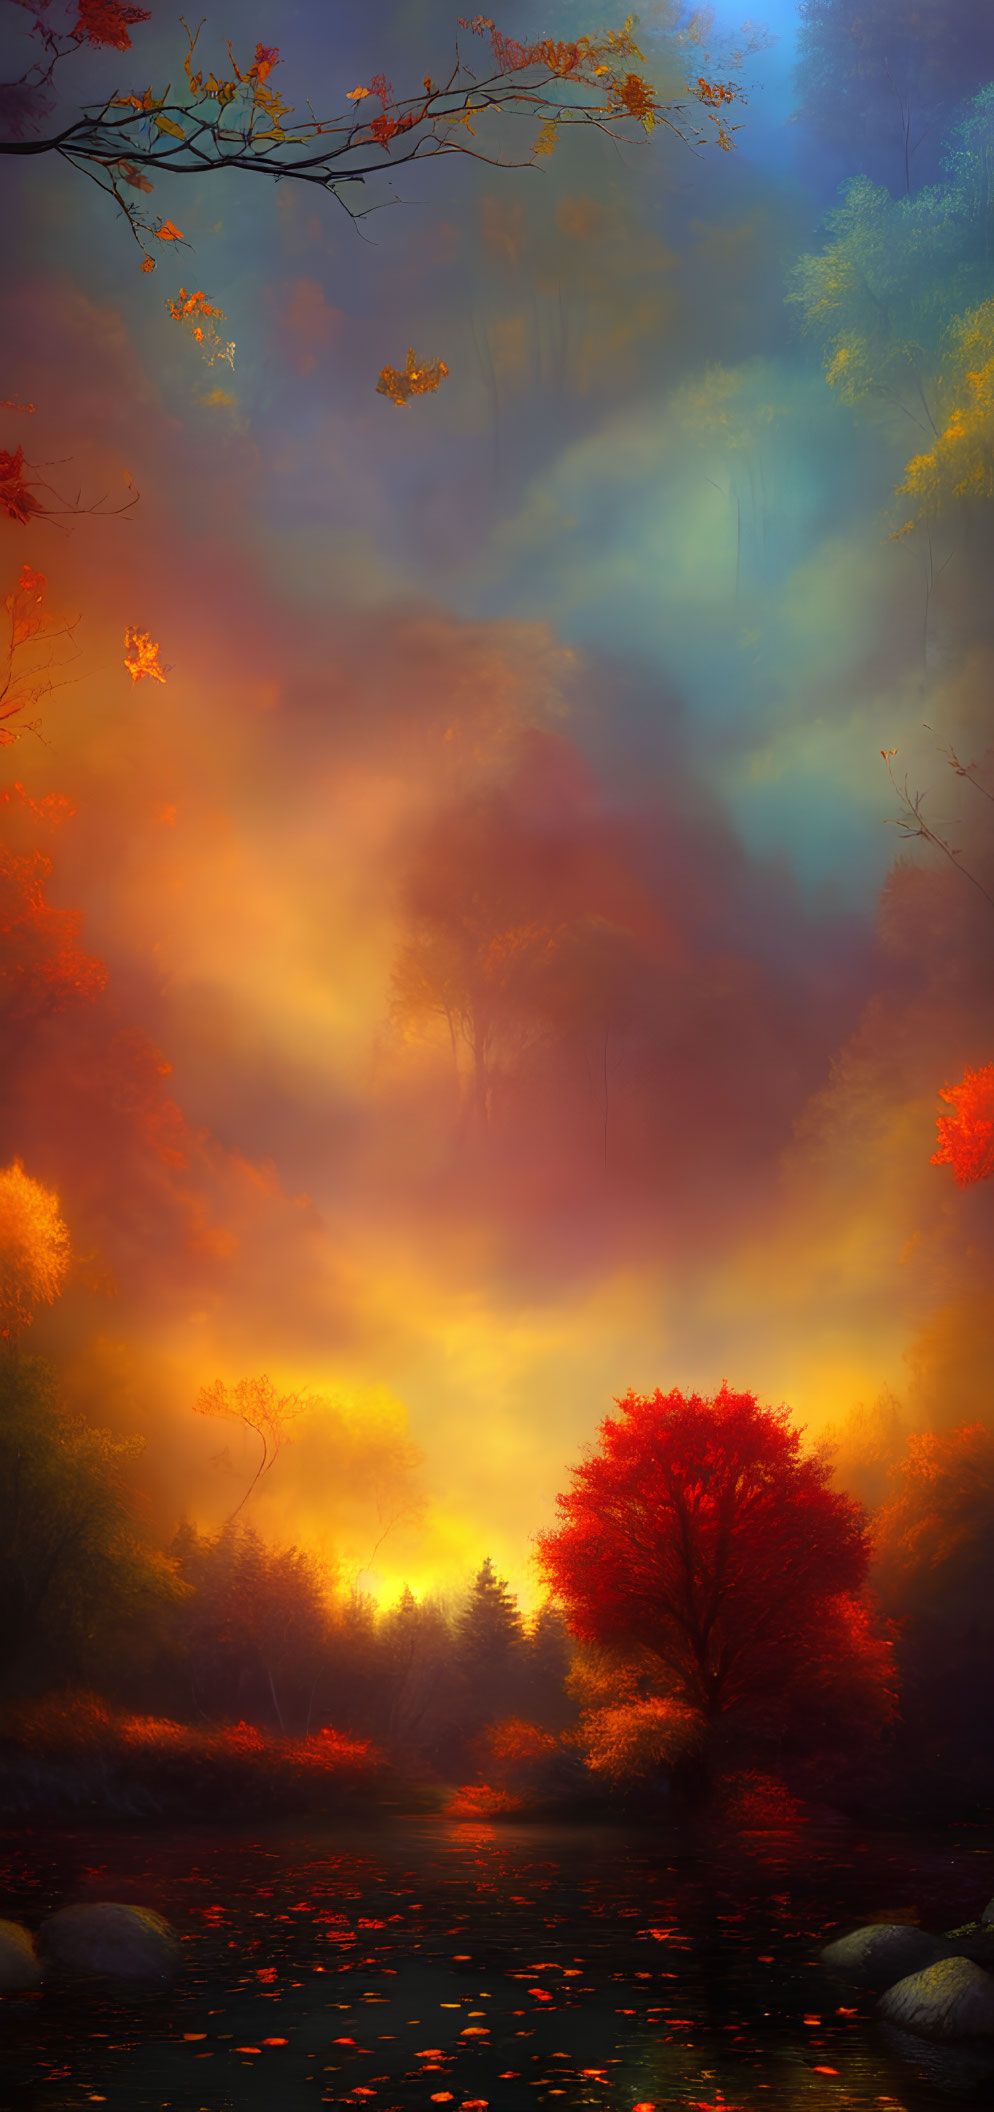 Vibrant autumn forest scene with red and orange foliage and serene river